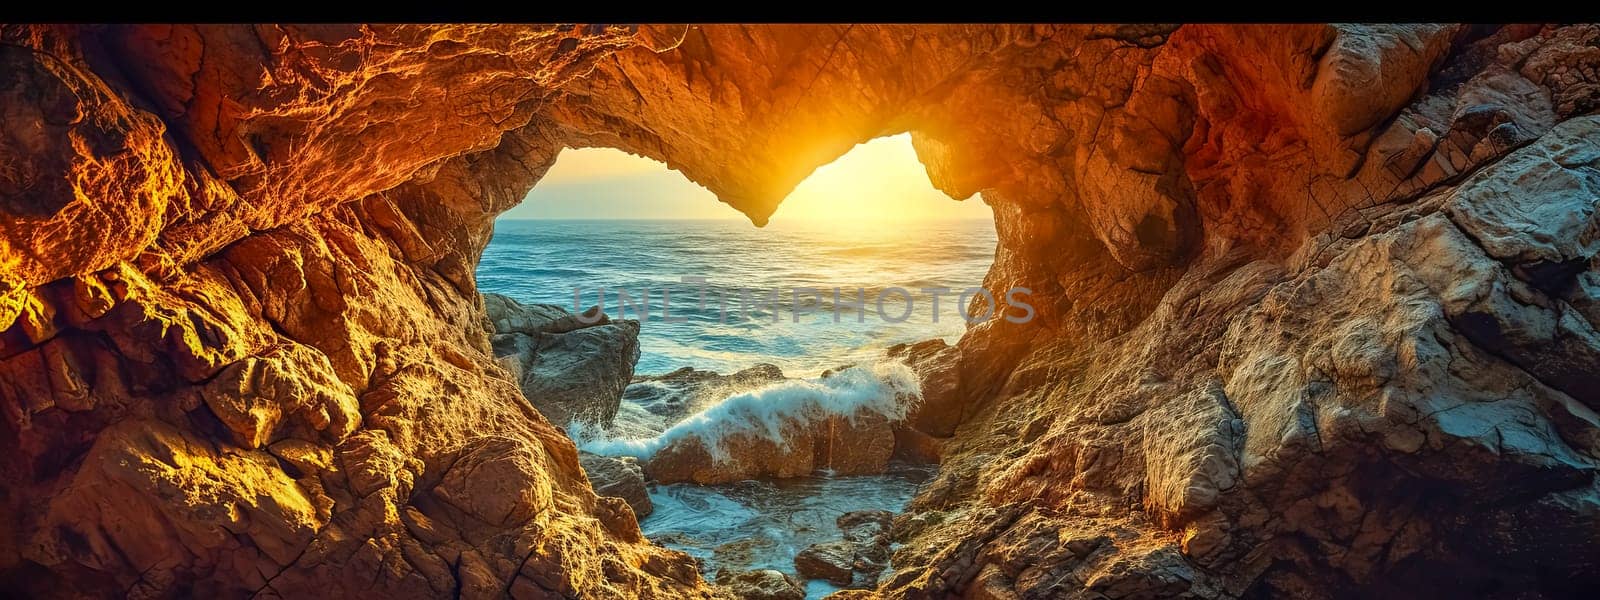 valentine's day. A majestic view from within a cave, framing a heart-shaped opening that overlooks the ocean bathed in the golden light of sunset, creating a romantic and serene seascape by Edophoto